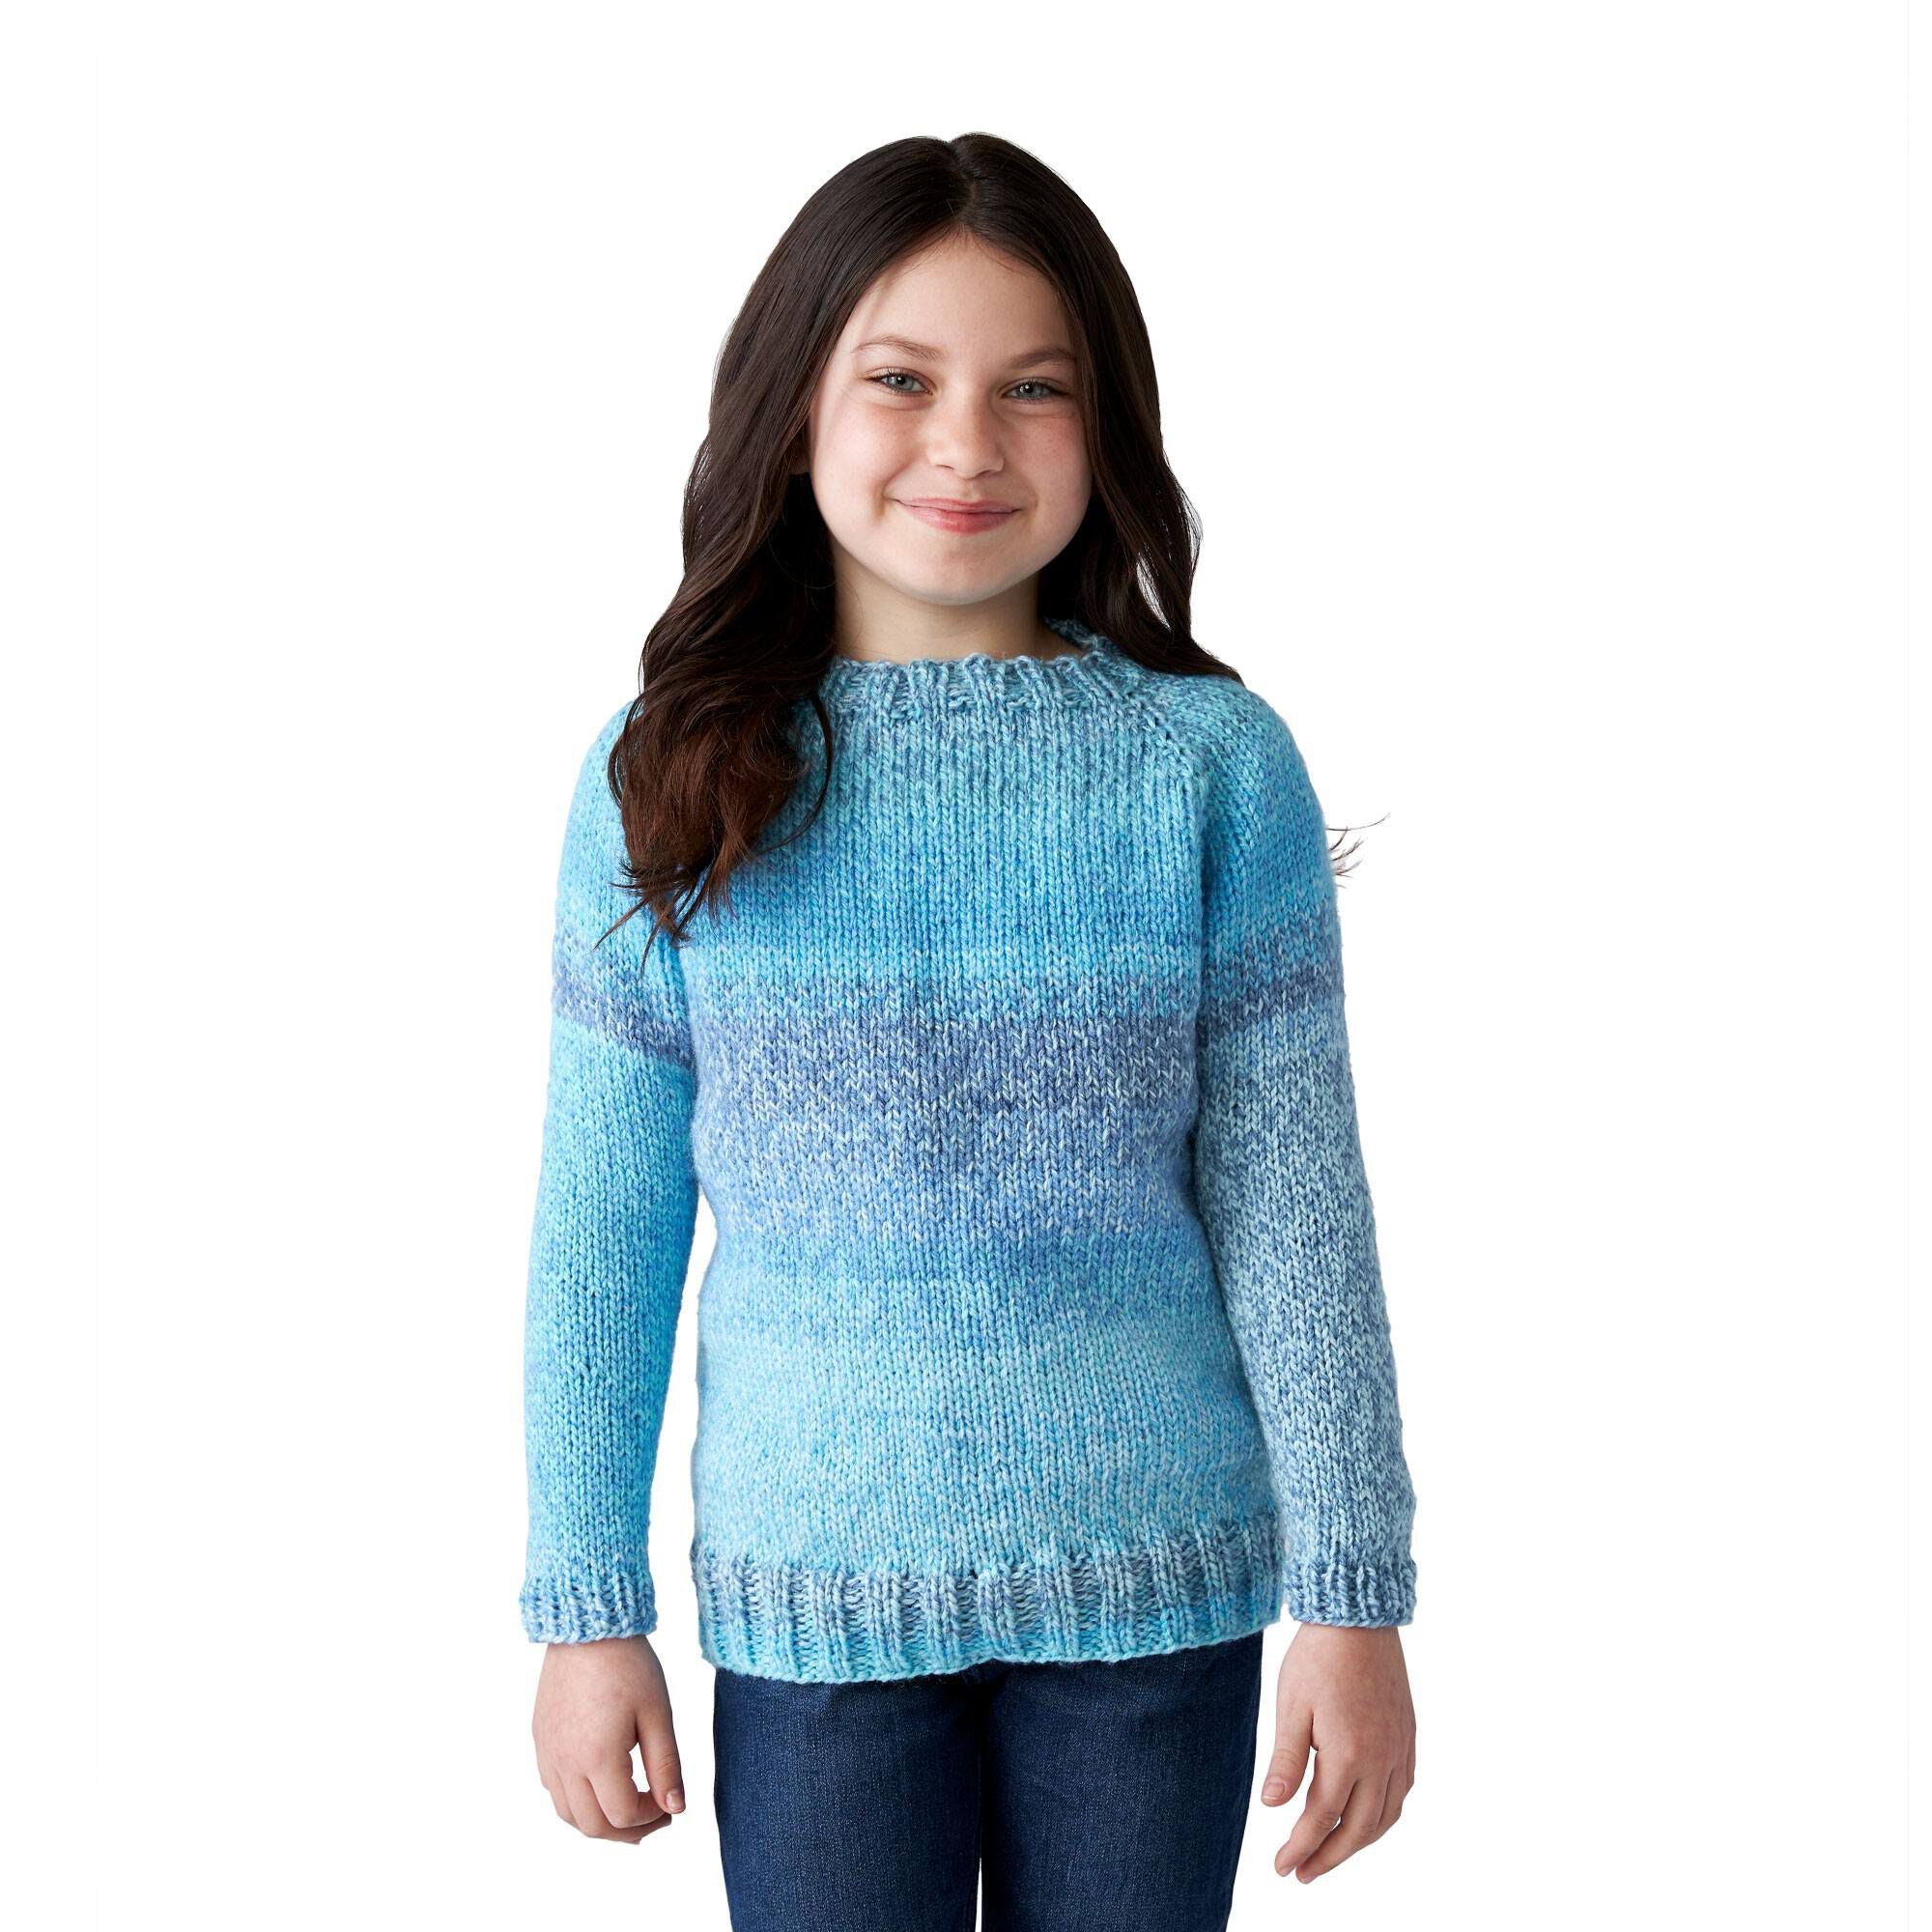 Knitting Patterns Galore - Child's Top Down Pullover